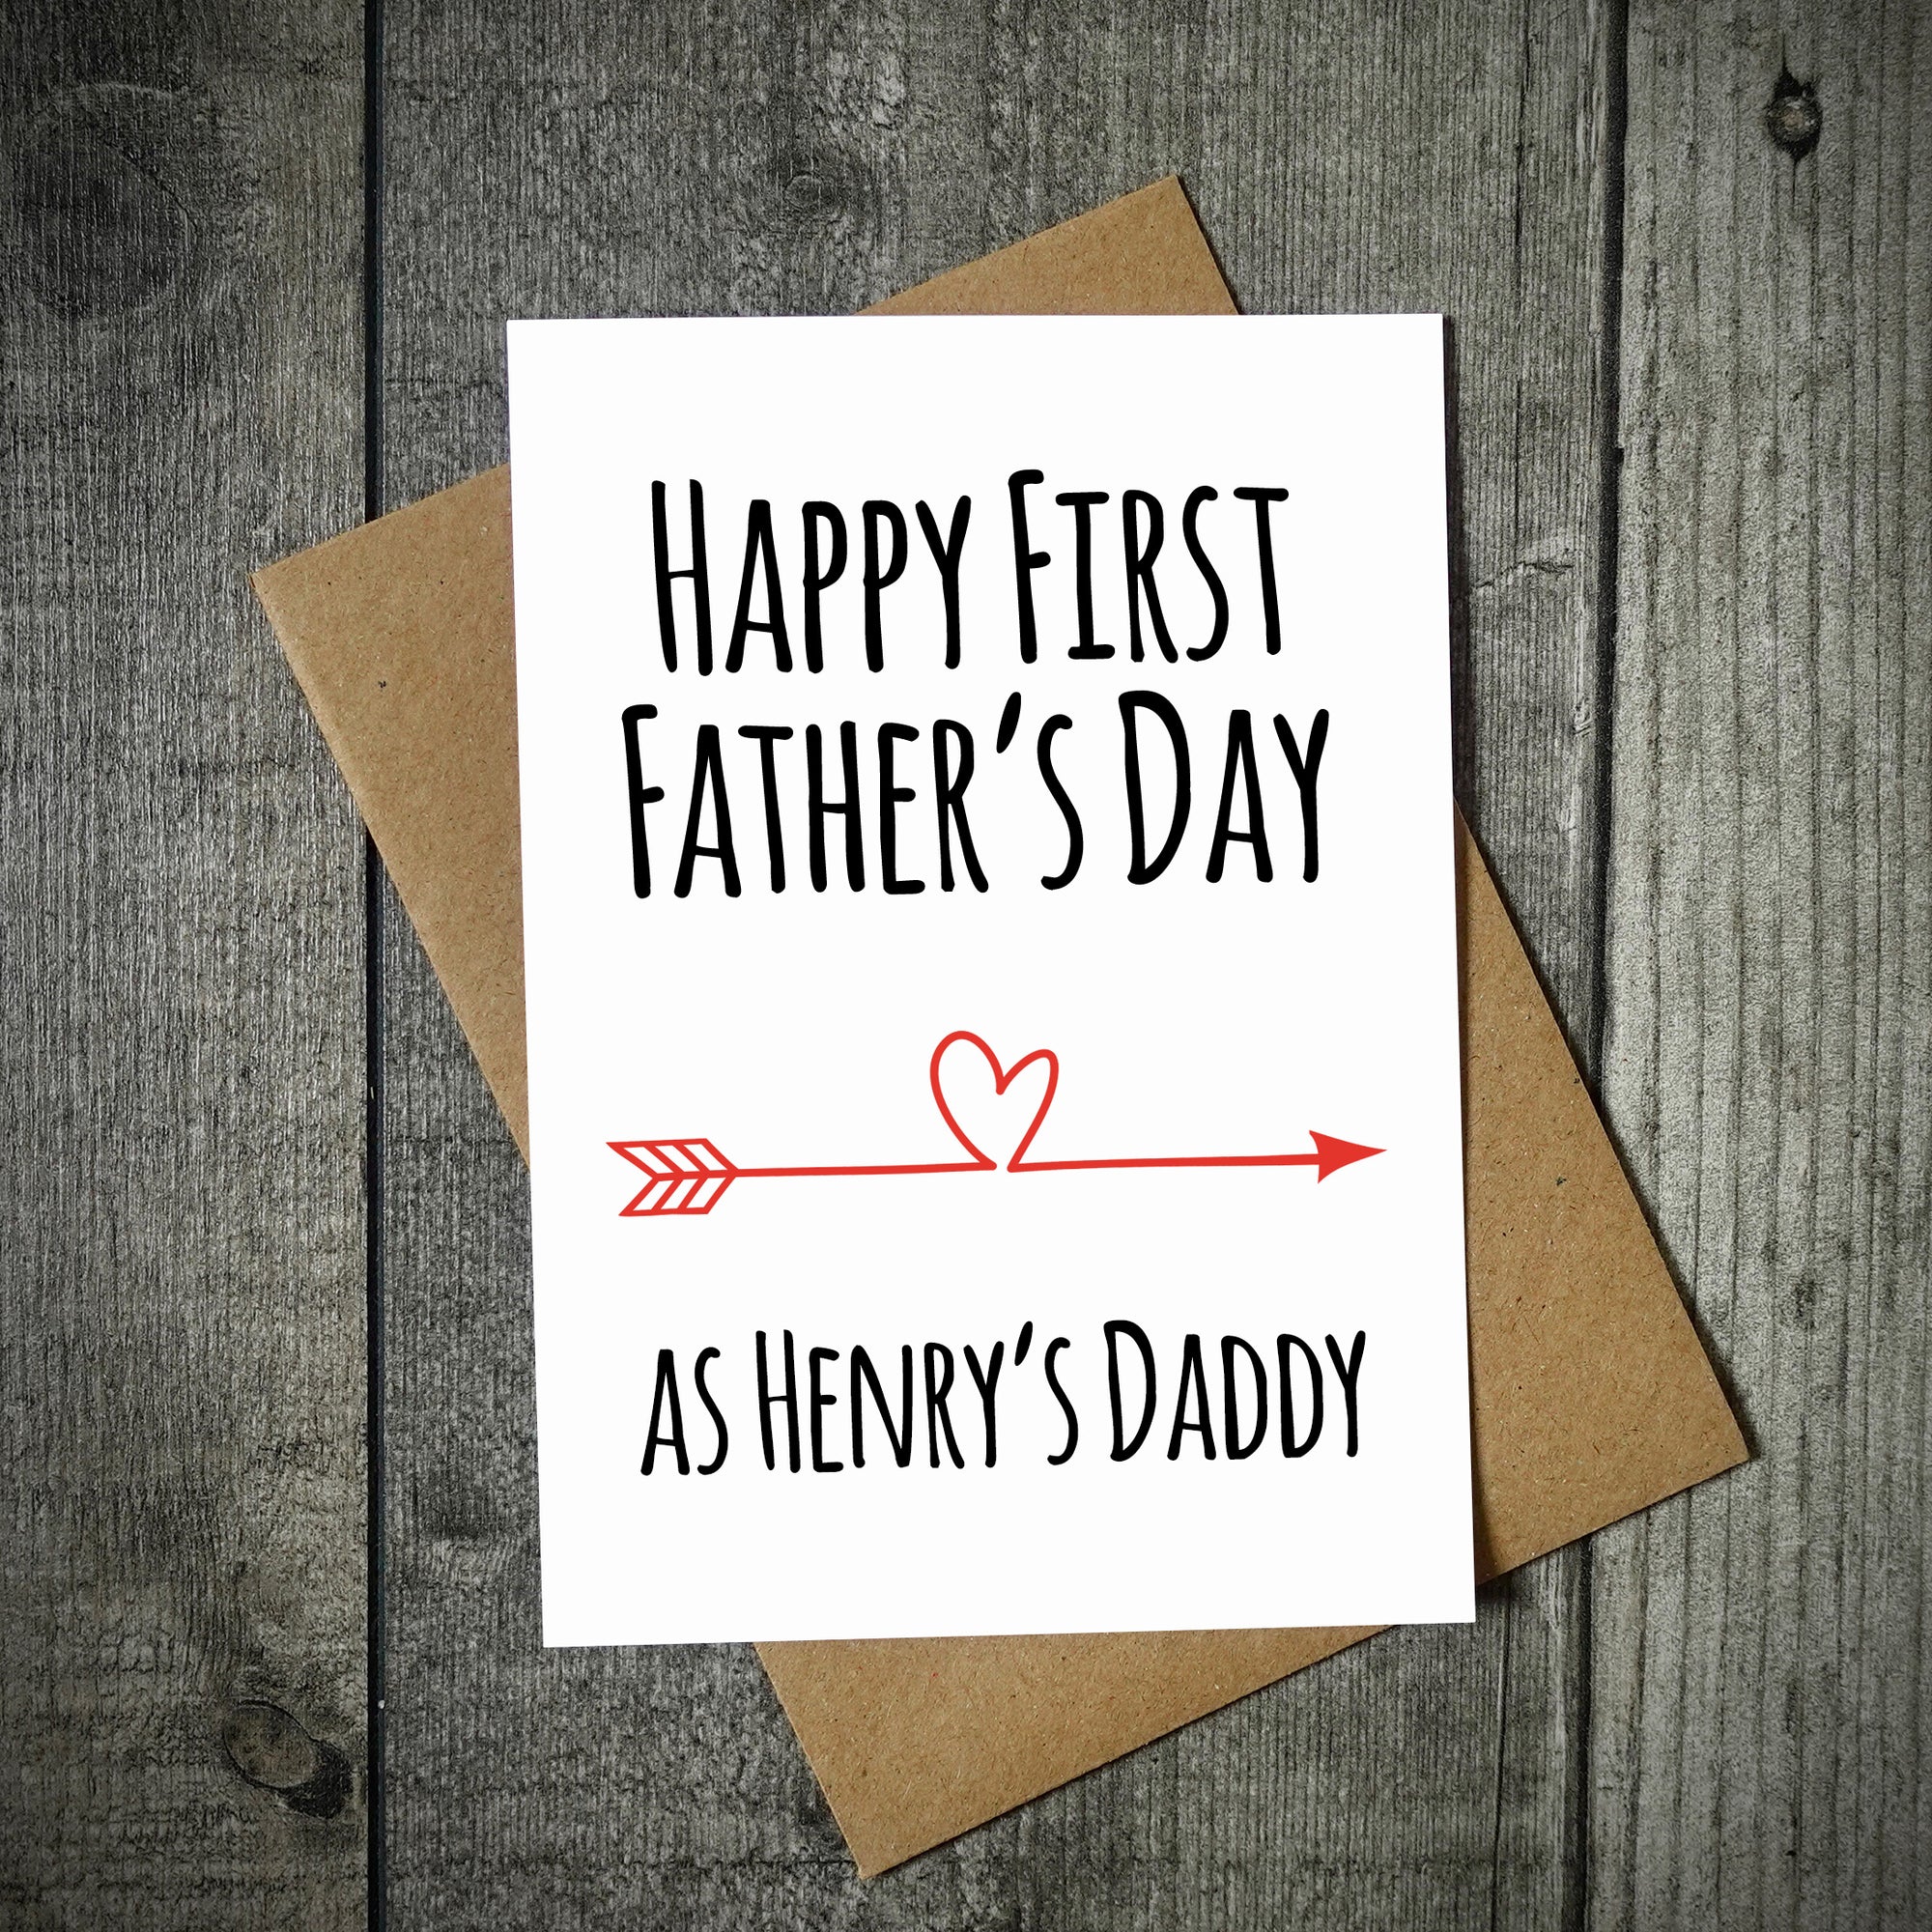 Happy First Father's Day - Personalised Father's Day Card